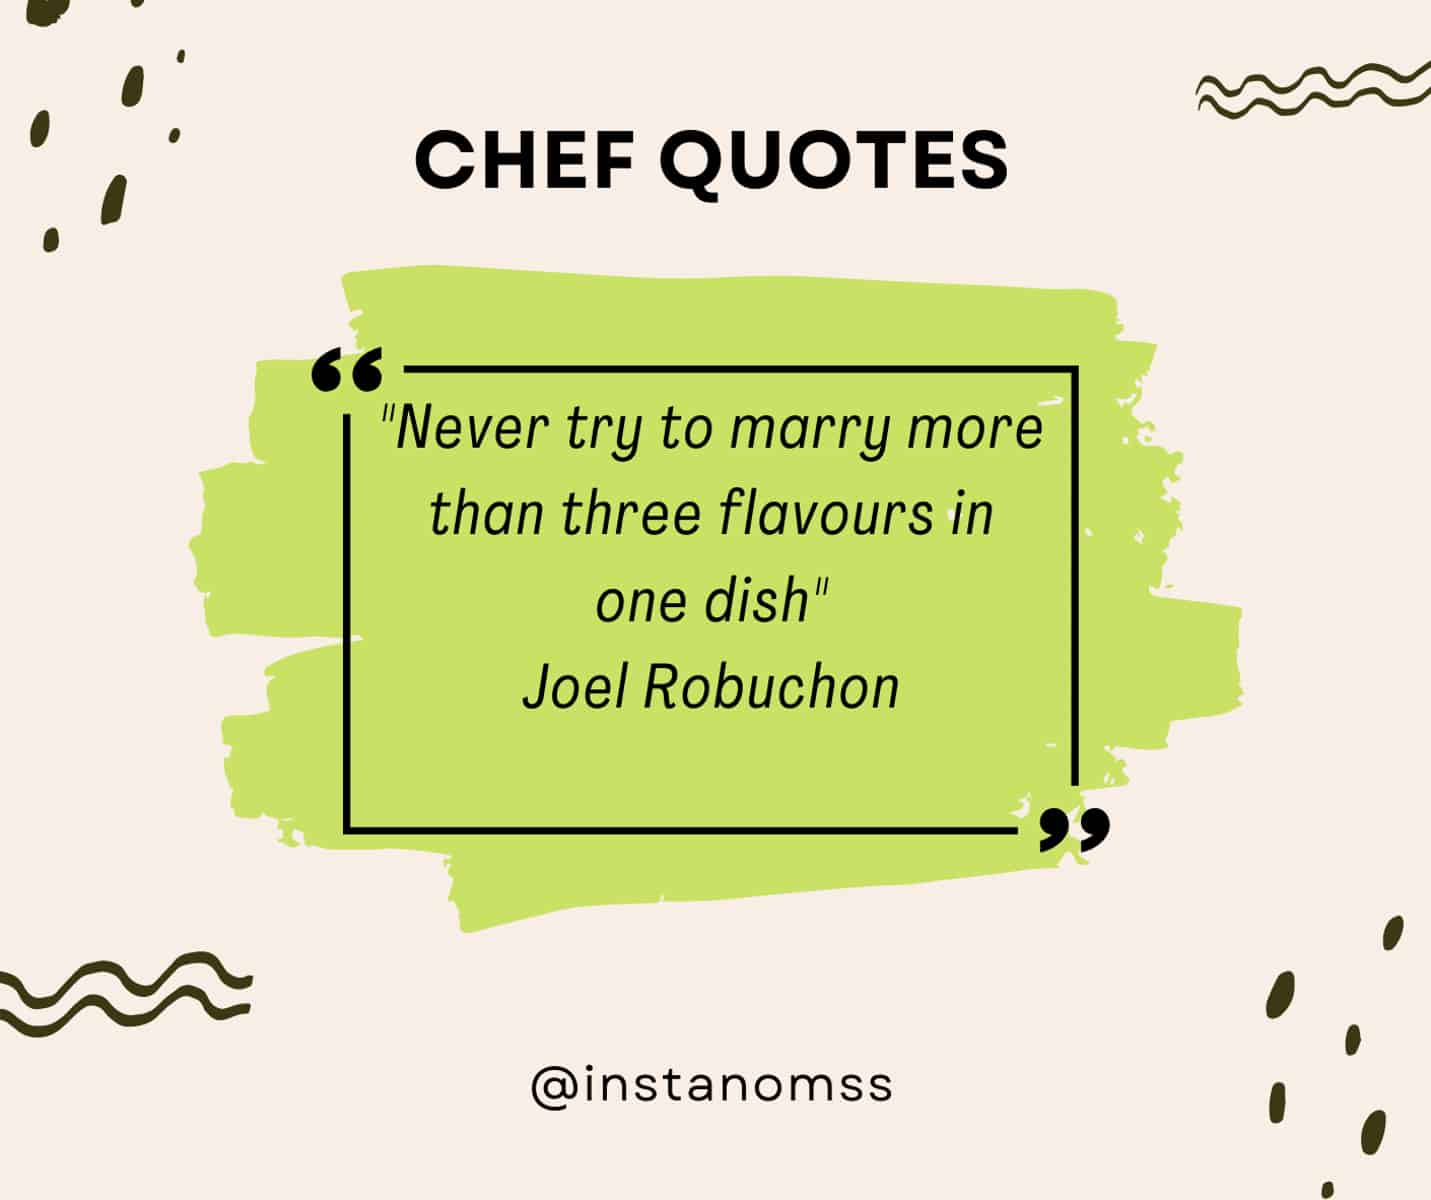 "Never try to marry more than three flavours in one dish" Joel Robuchon